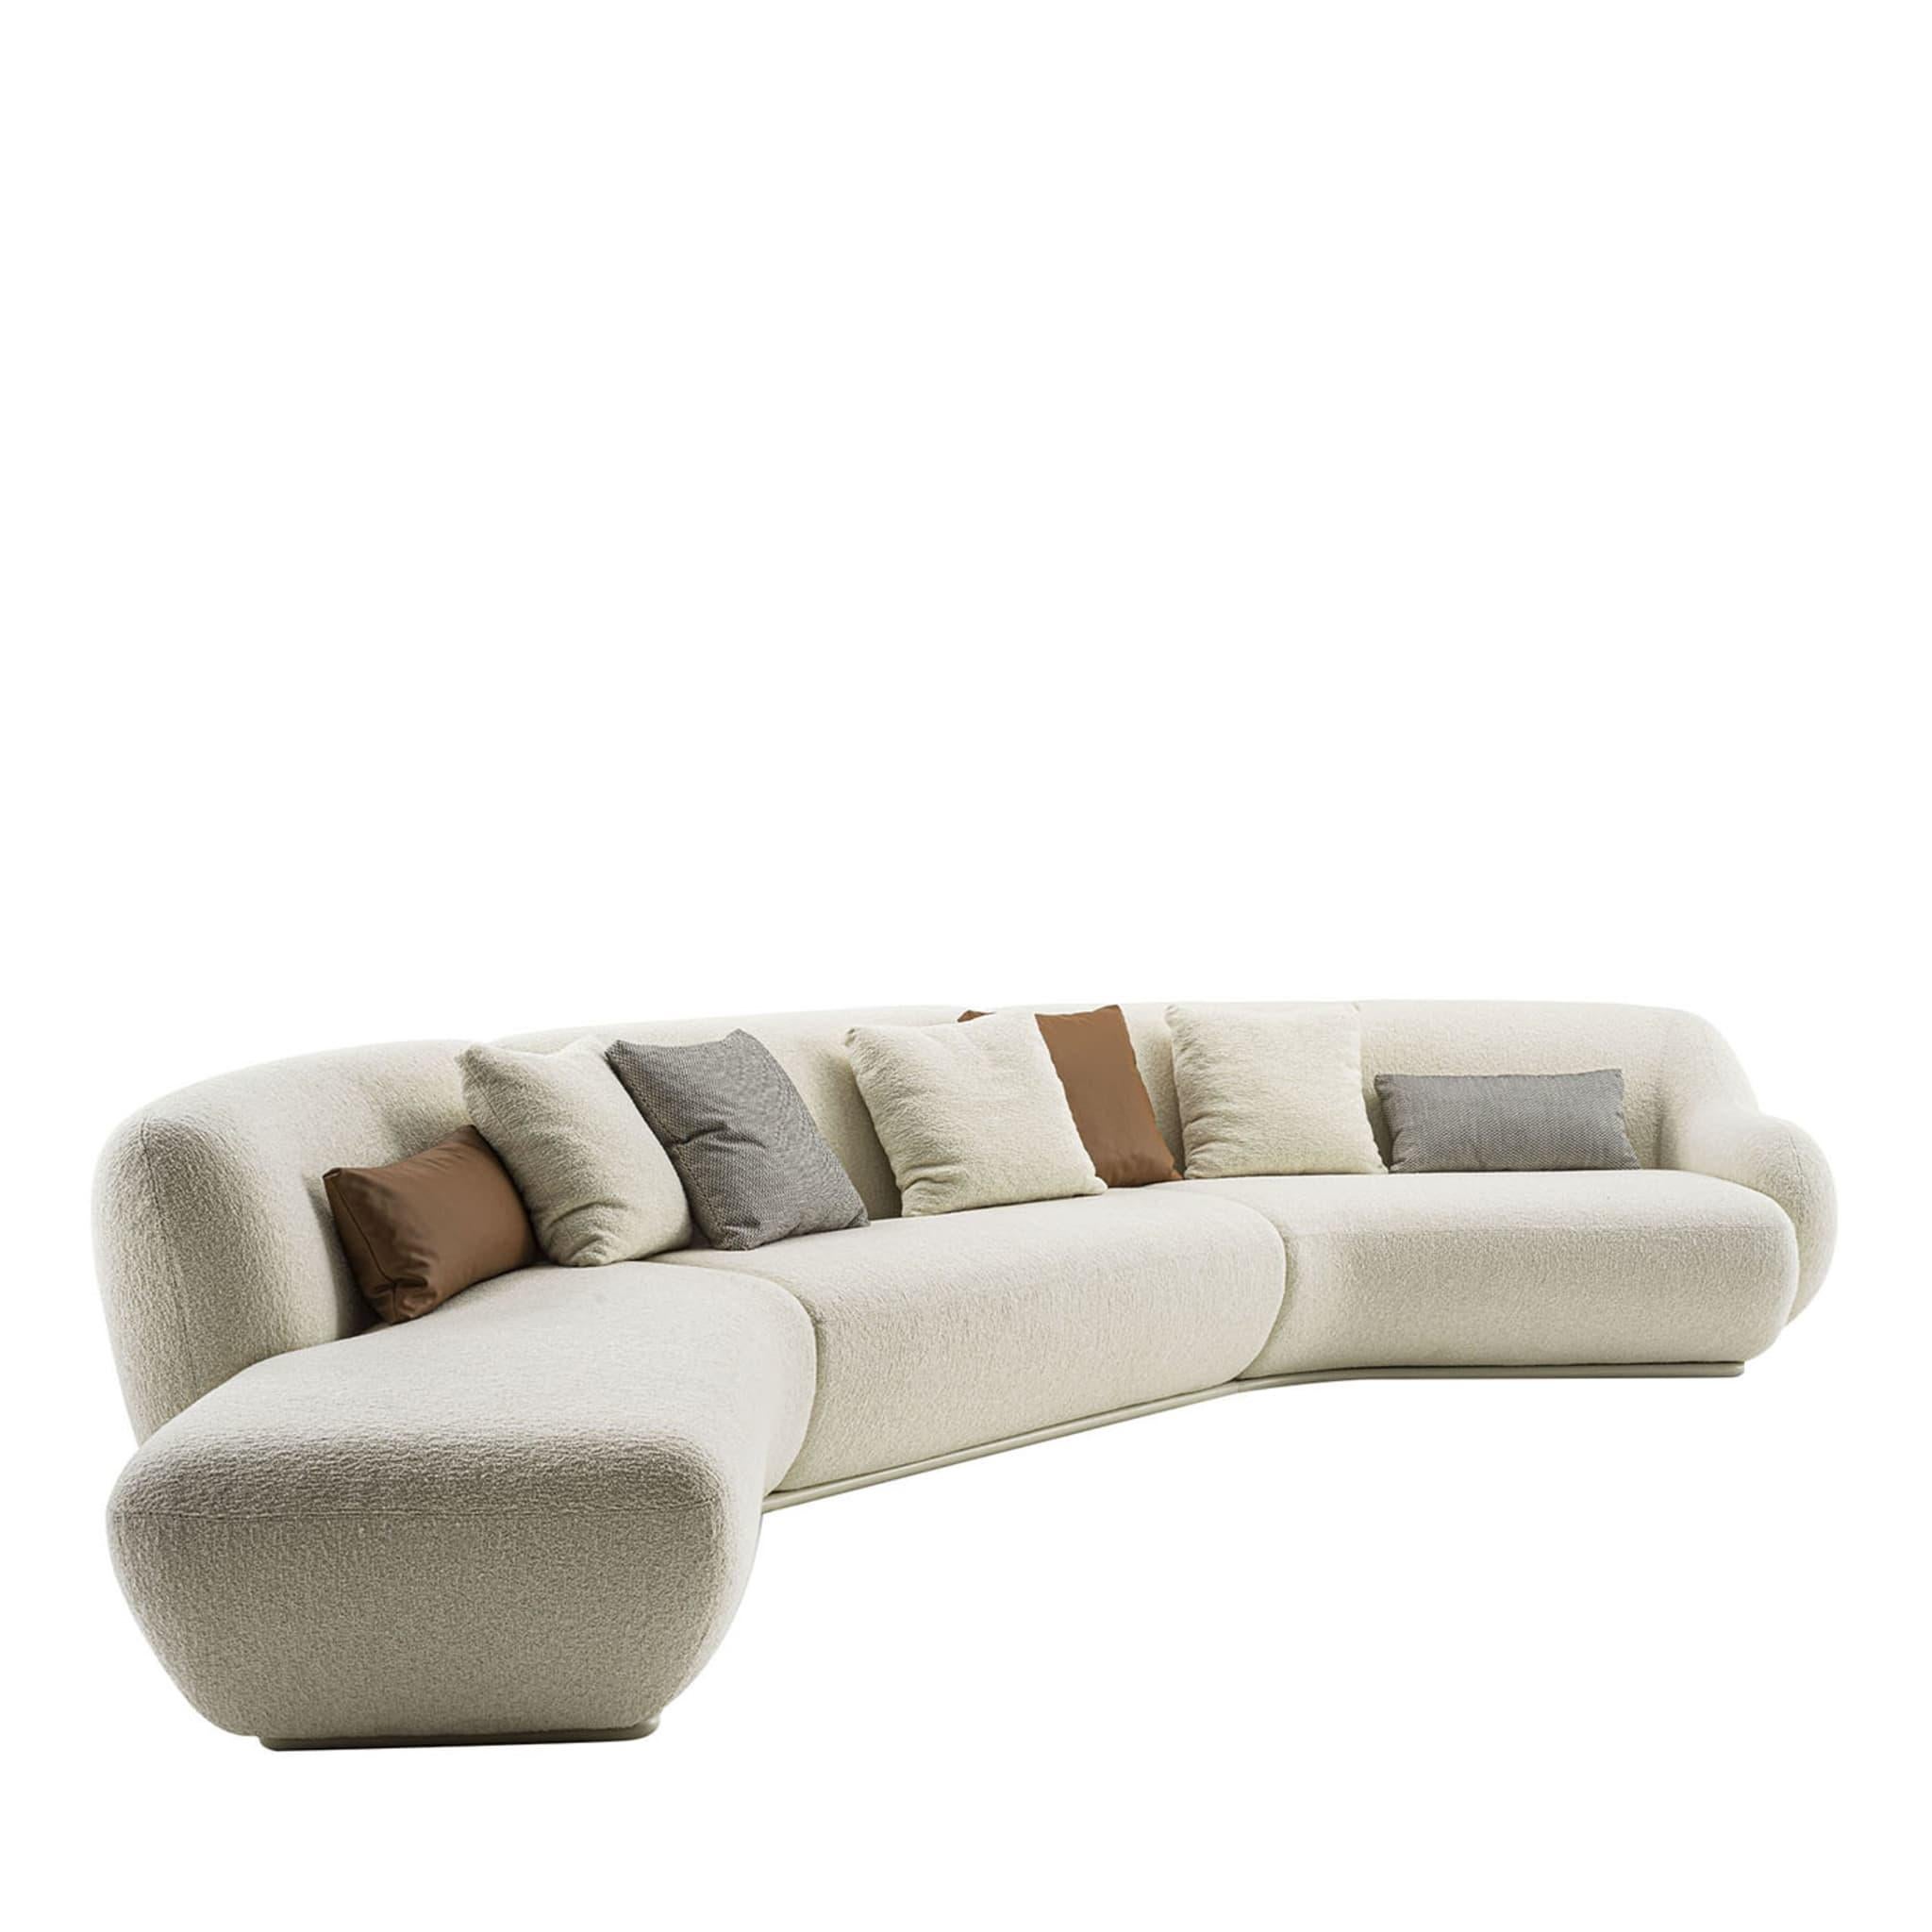 Nuvola White Modular Sofa In New Condition For Sale In Milan, IT